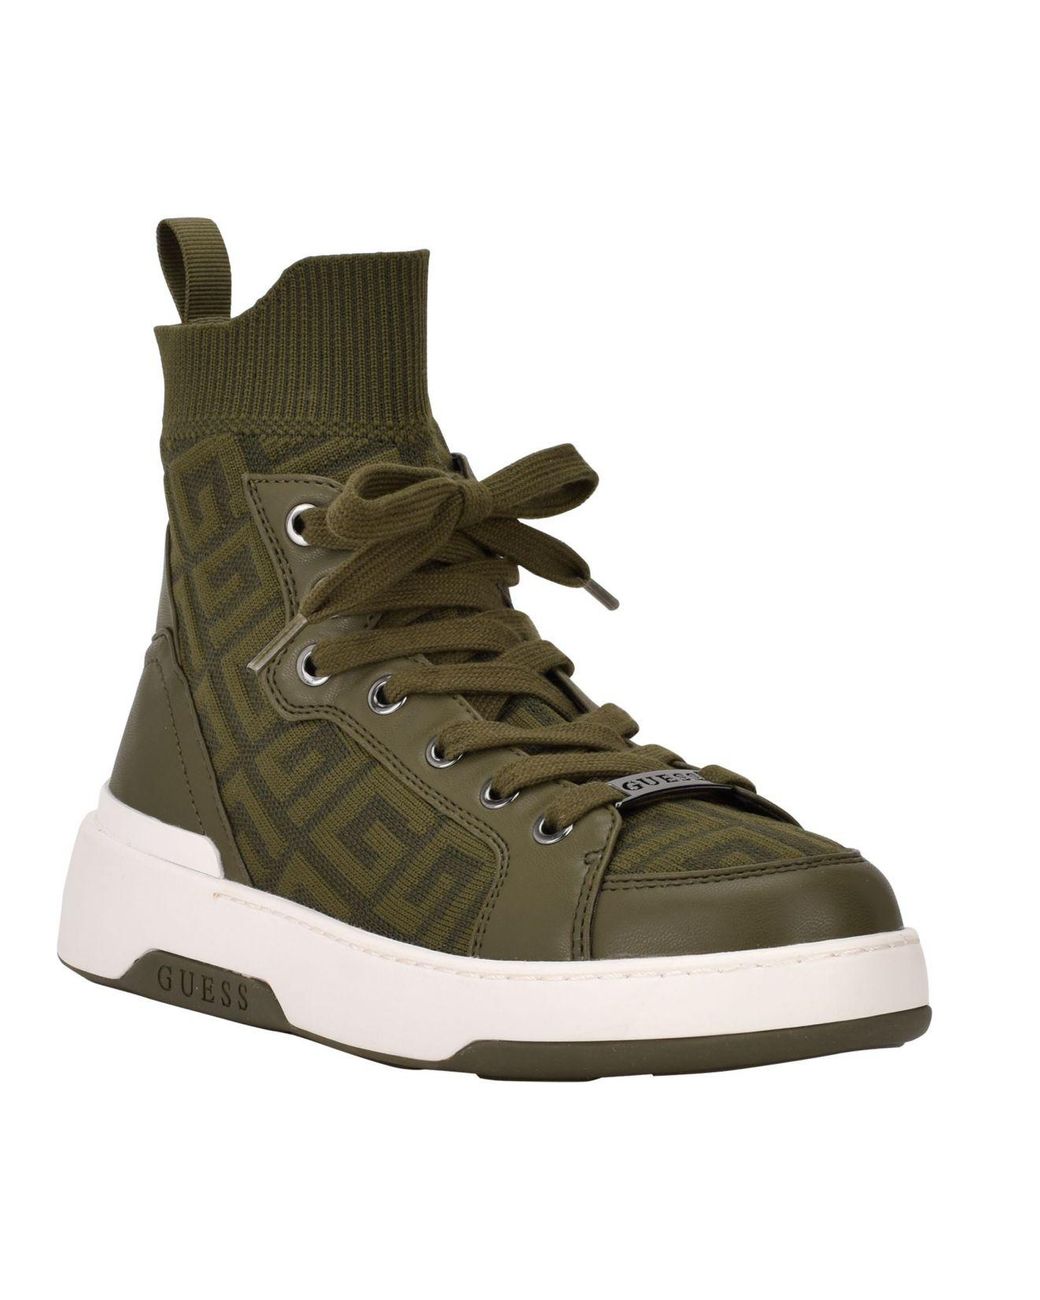 Guess Manney High Top Logo Sneaker in Olive (Green) | Lyst